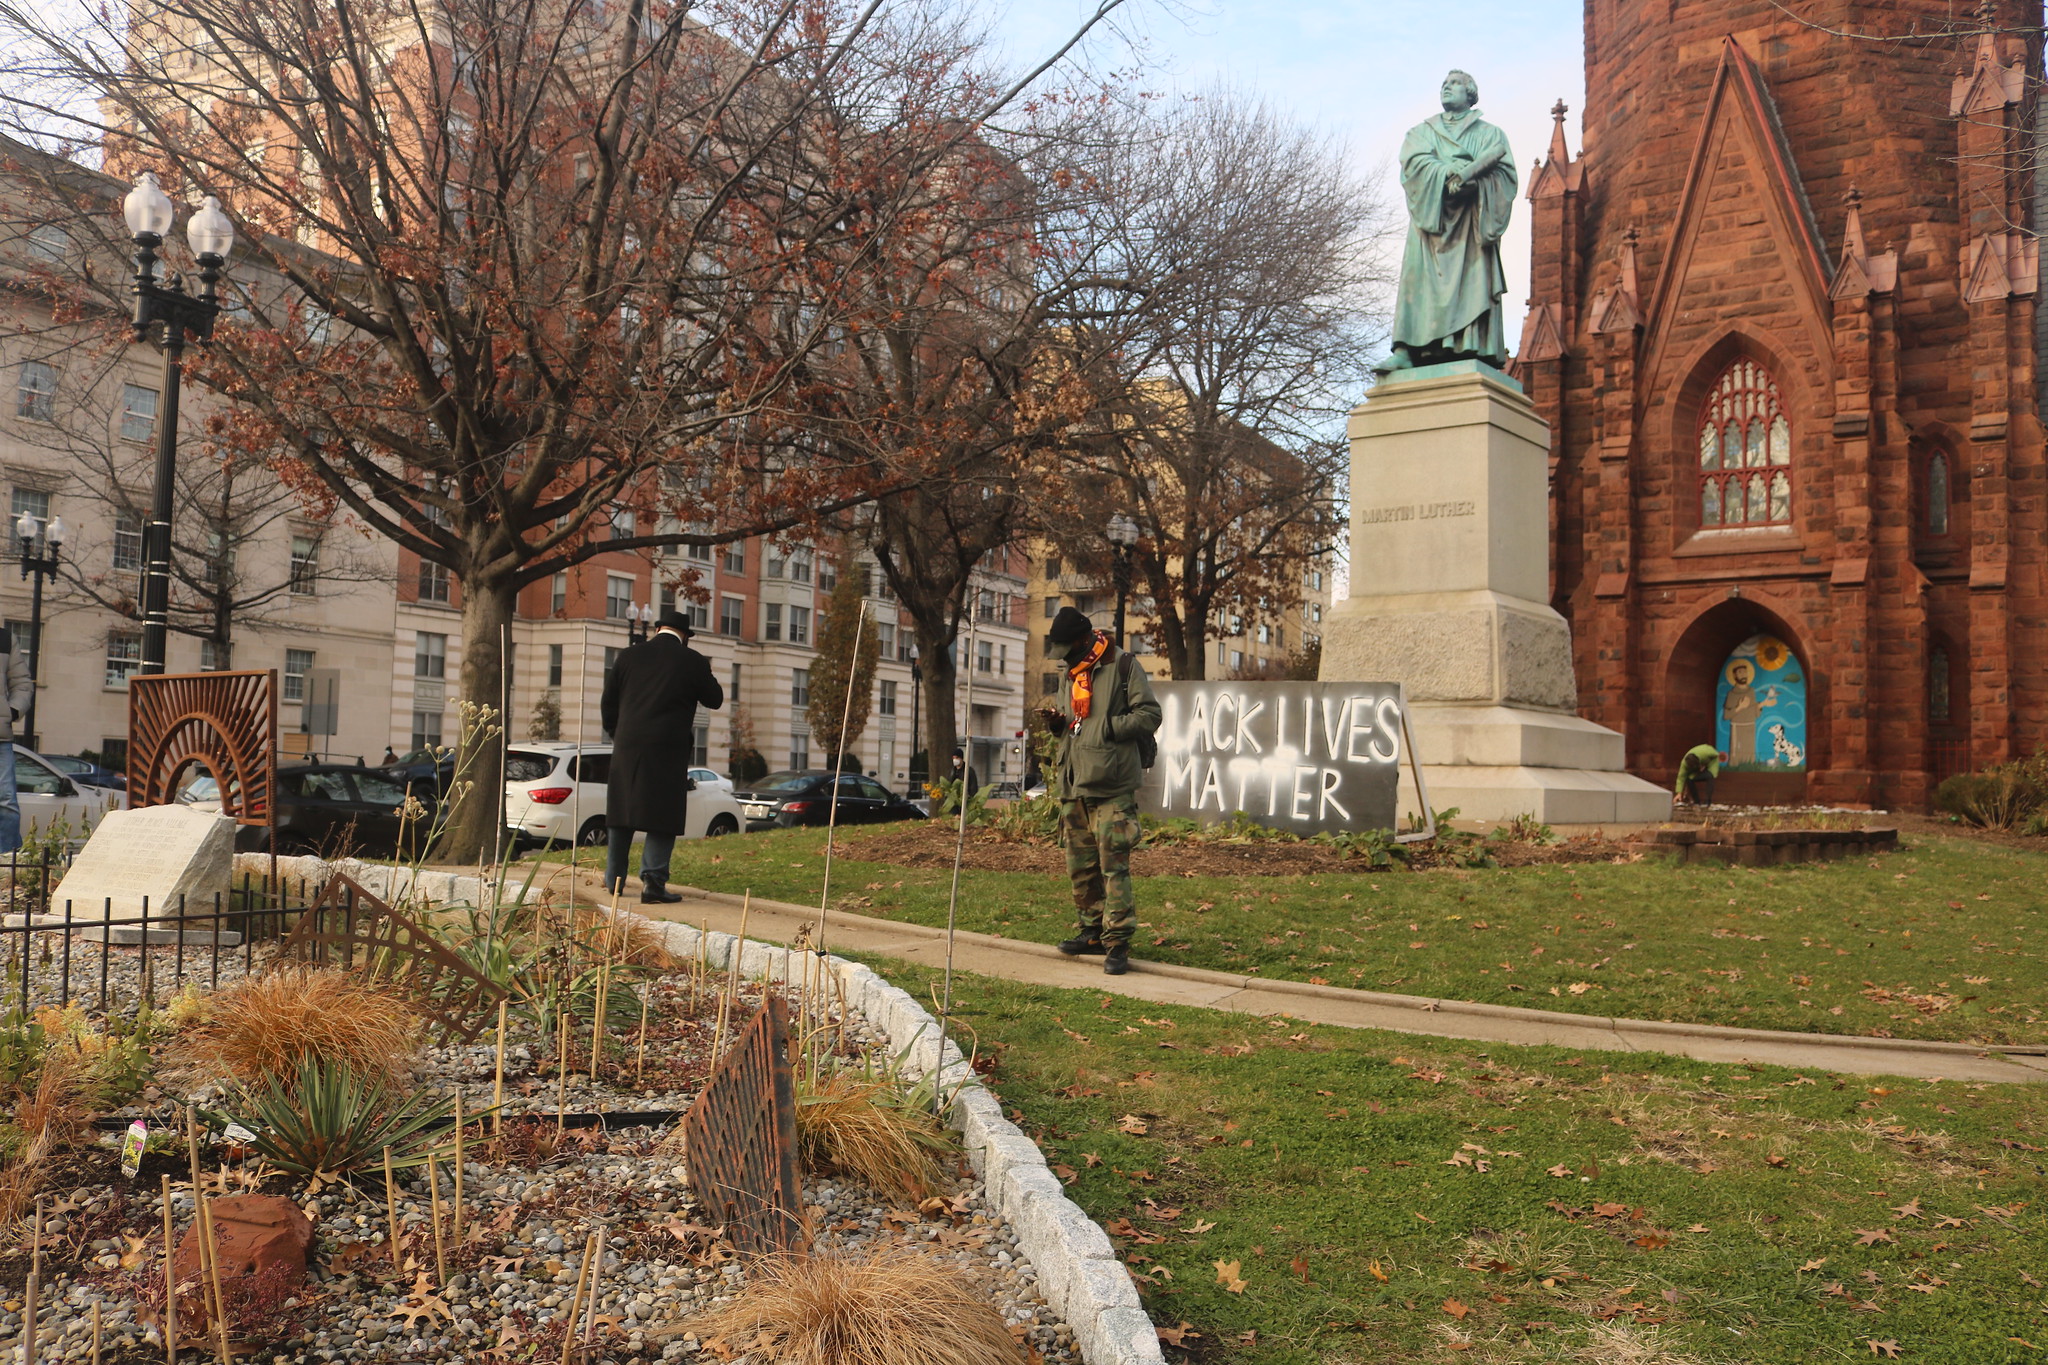 Photo of a garden, two people standing on a path in the grass, and a statue of Martin Luther with a "Black LIves Matter" sign leaning against it in front of a red church building.